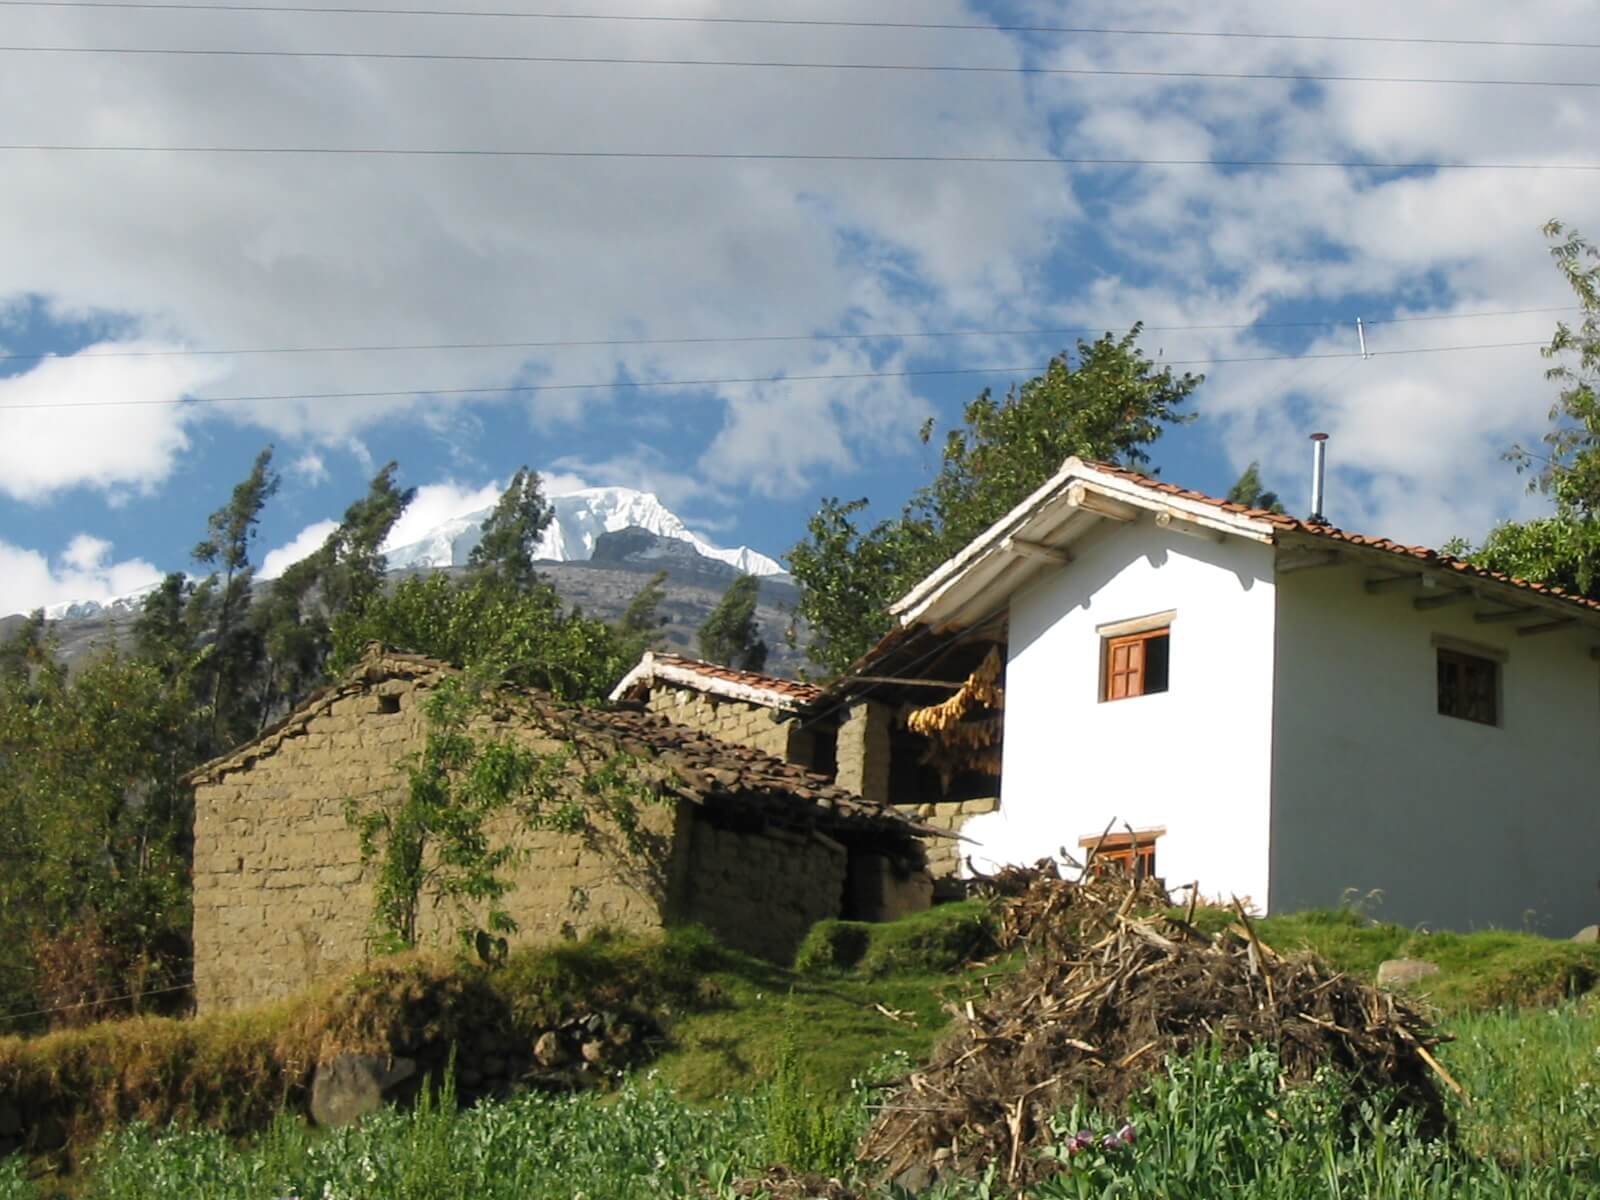 Homestay in Vicos. Community-Based Tourism in Huaraz | RESPONSible Travel Peru